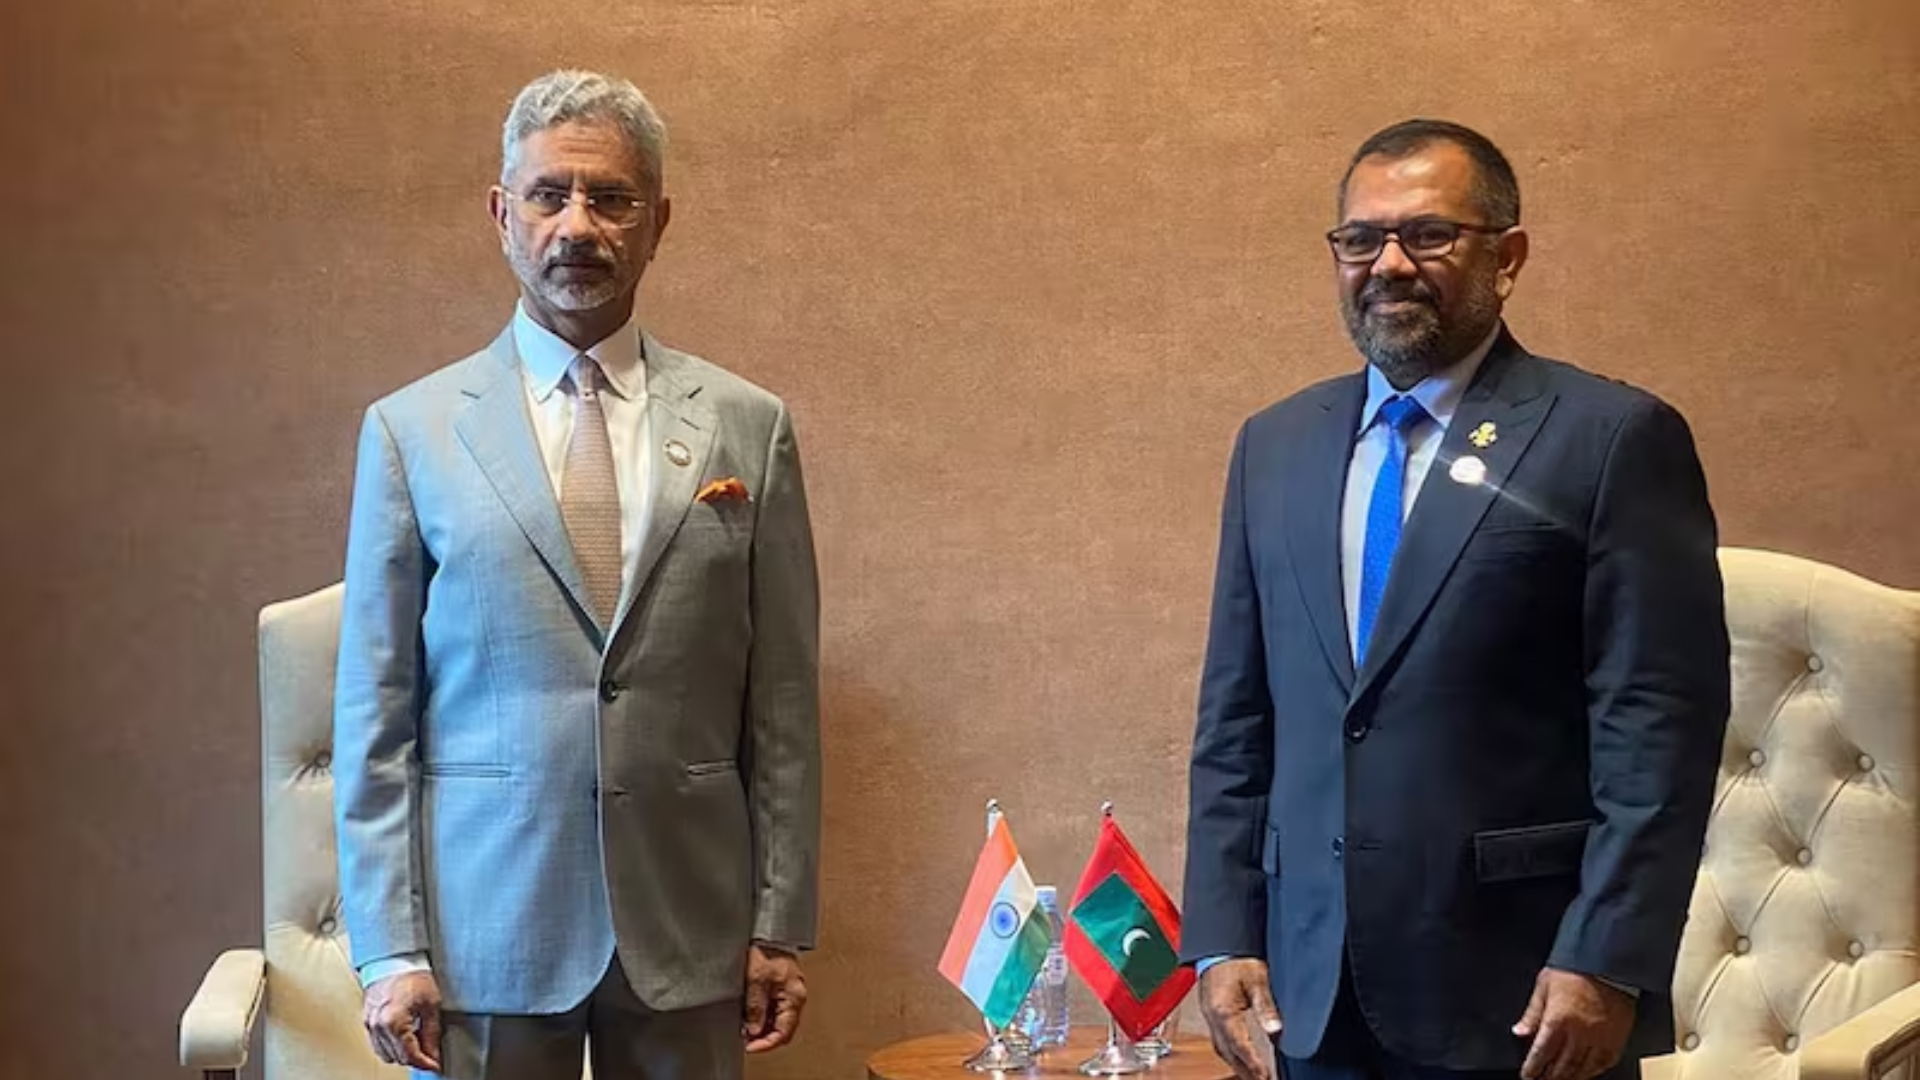 Maldives Foreign Minister Set To Meet With Indian External Affairs Minister